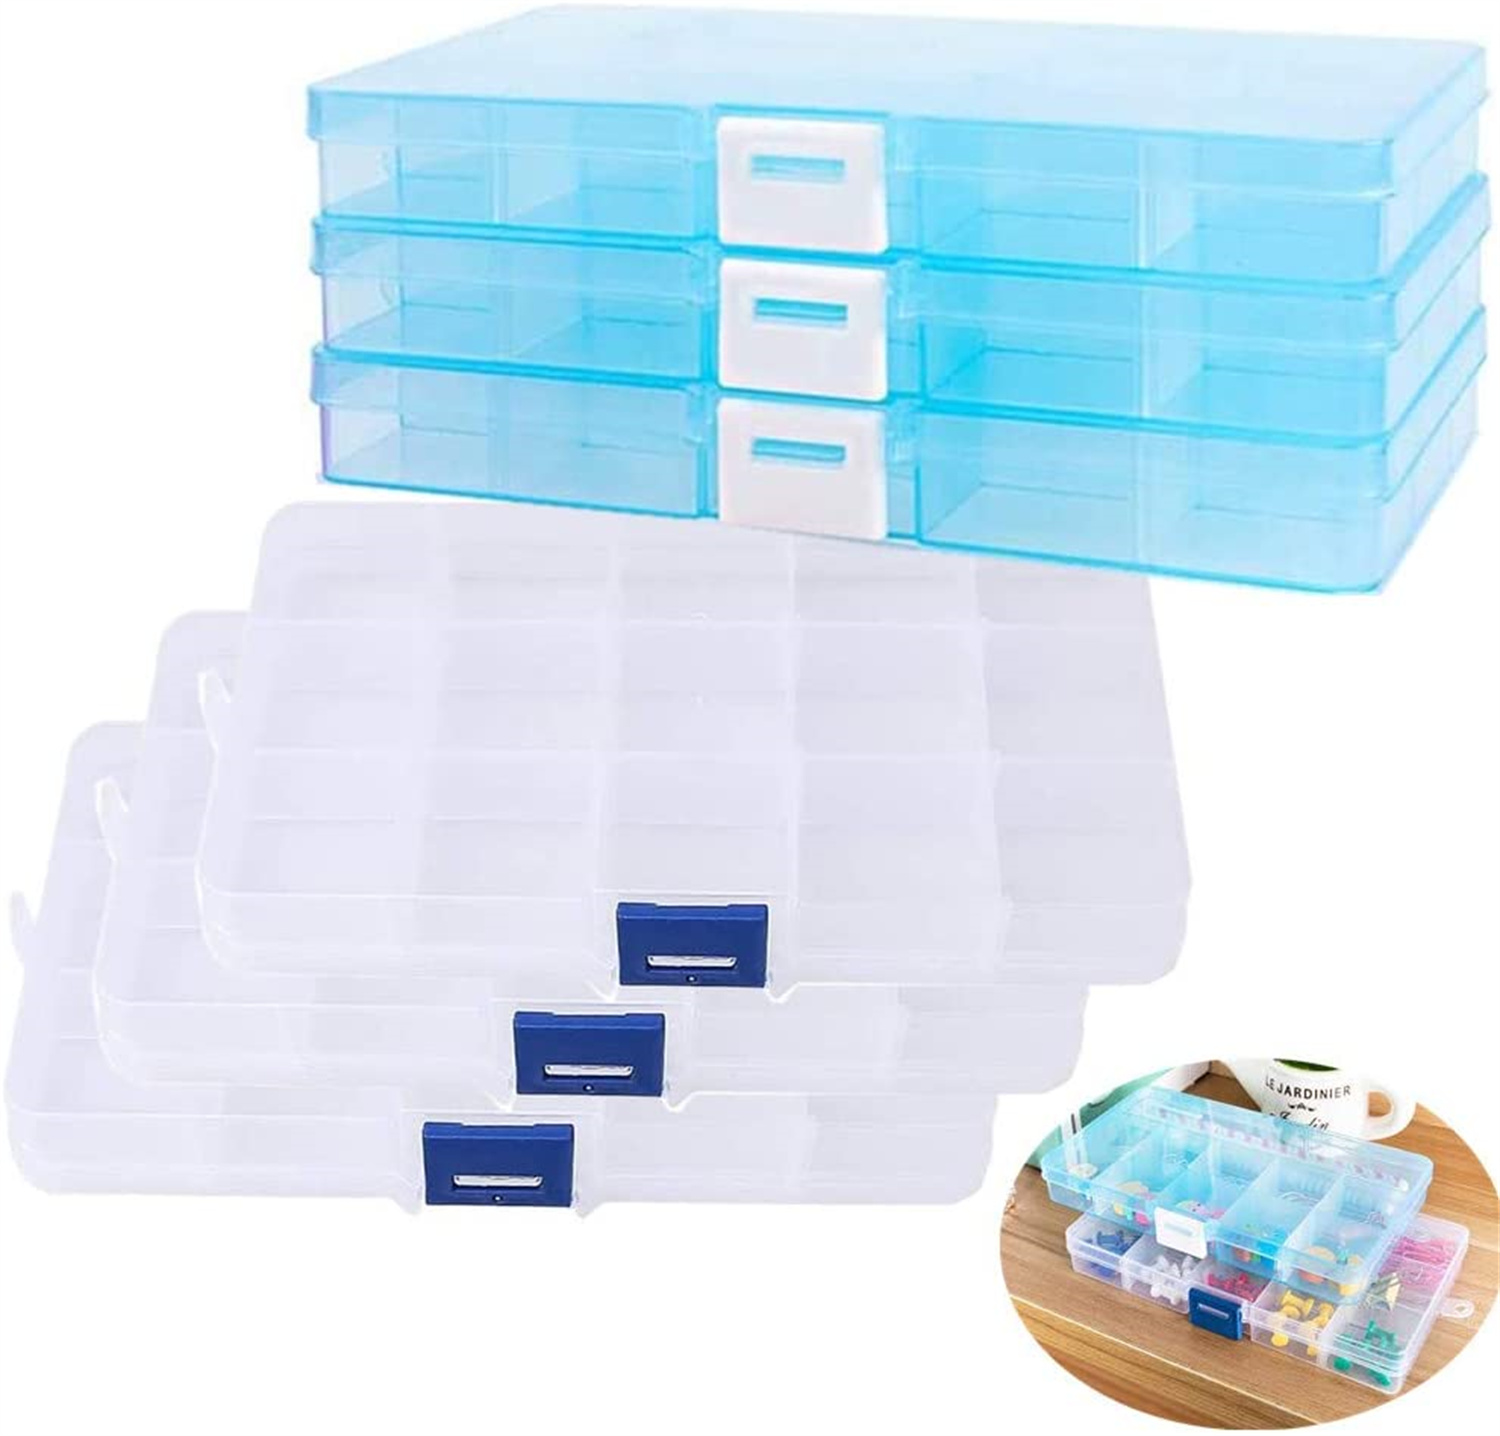 6 Pcs Plastic Jewellery Organizer Box Clear Bead Storage Box with 15 Grids  Adjustable Craft Box Organiser Plastic Storage Case for Beads, Earring